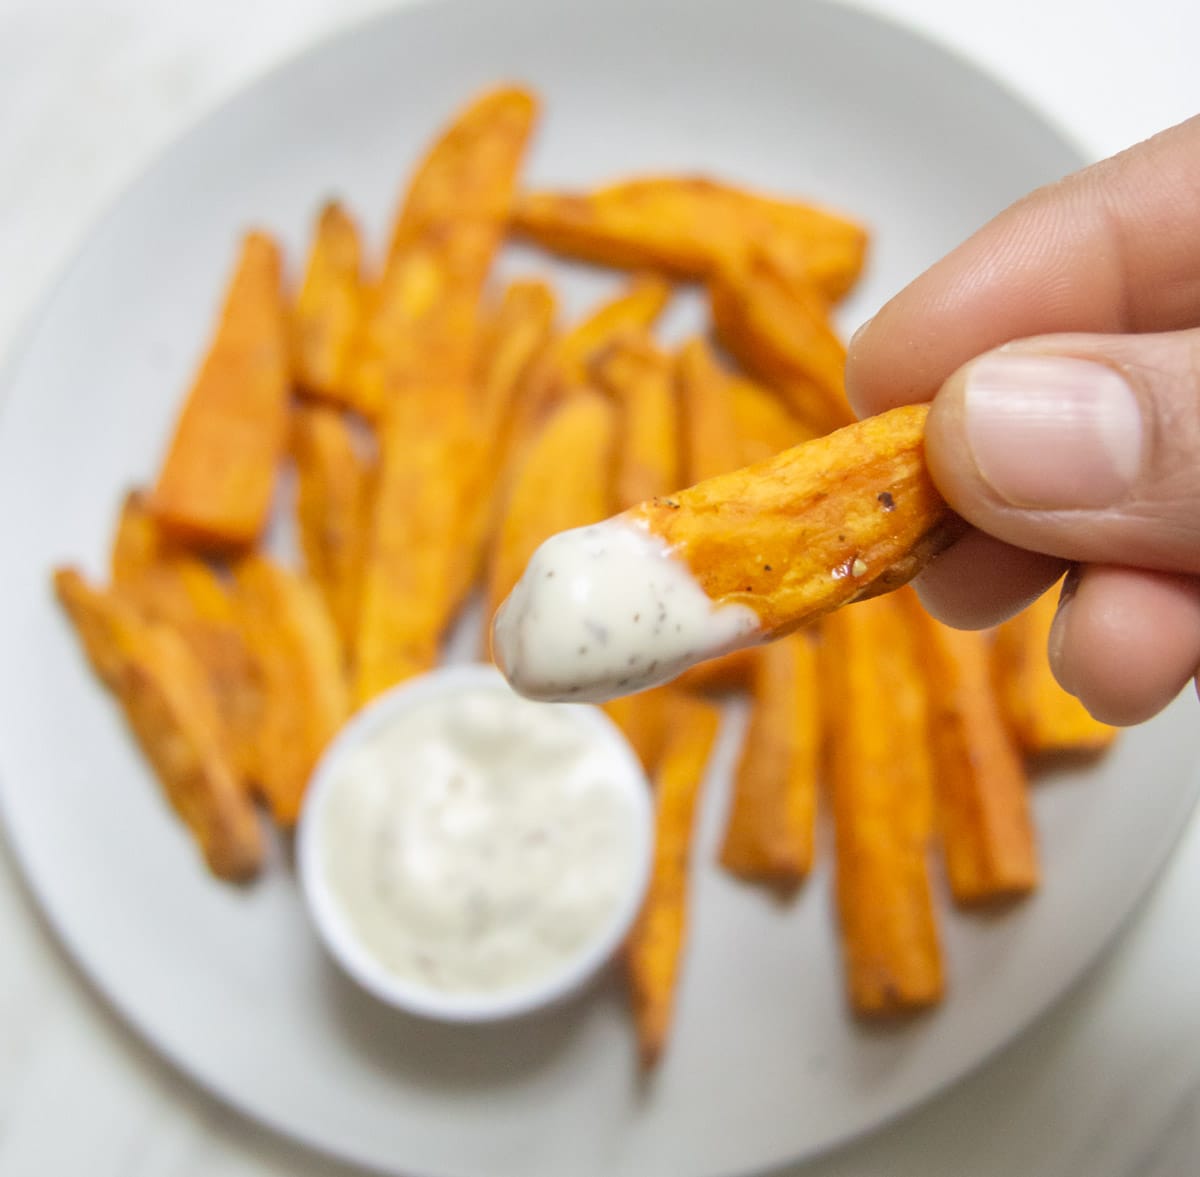 a hand holding a sweet potato wedge dipped in a white sauce on top of a plate of sweet potato wedges.